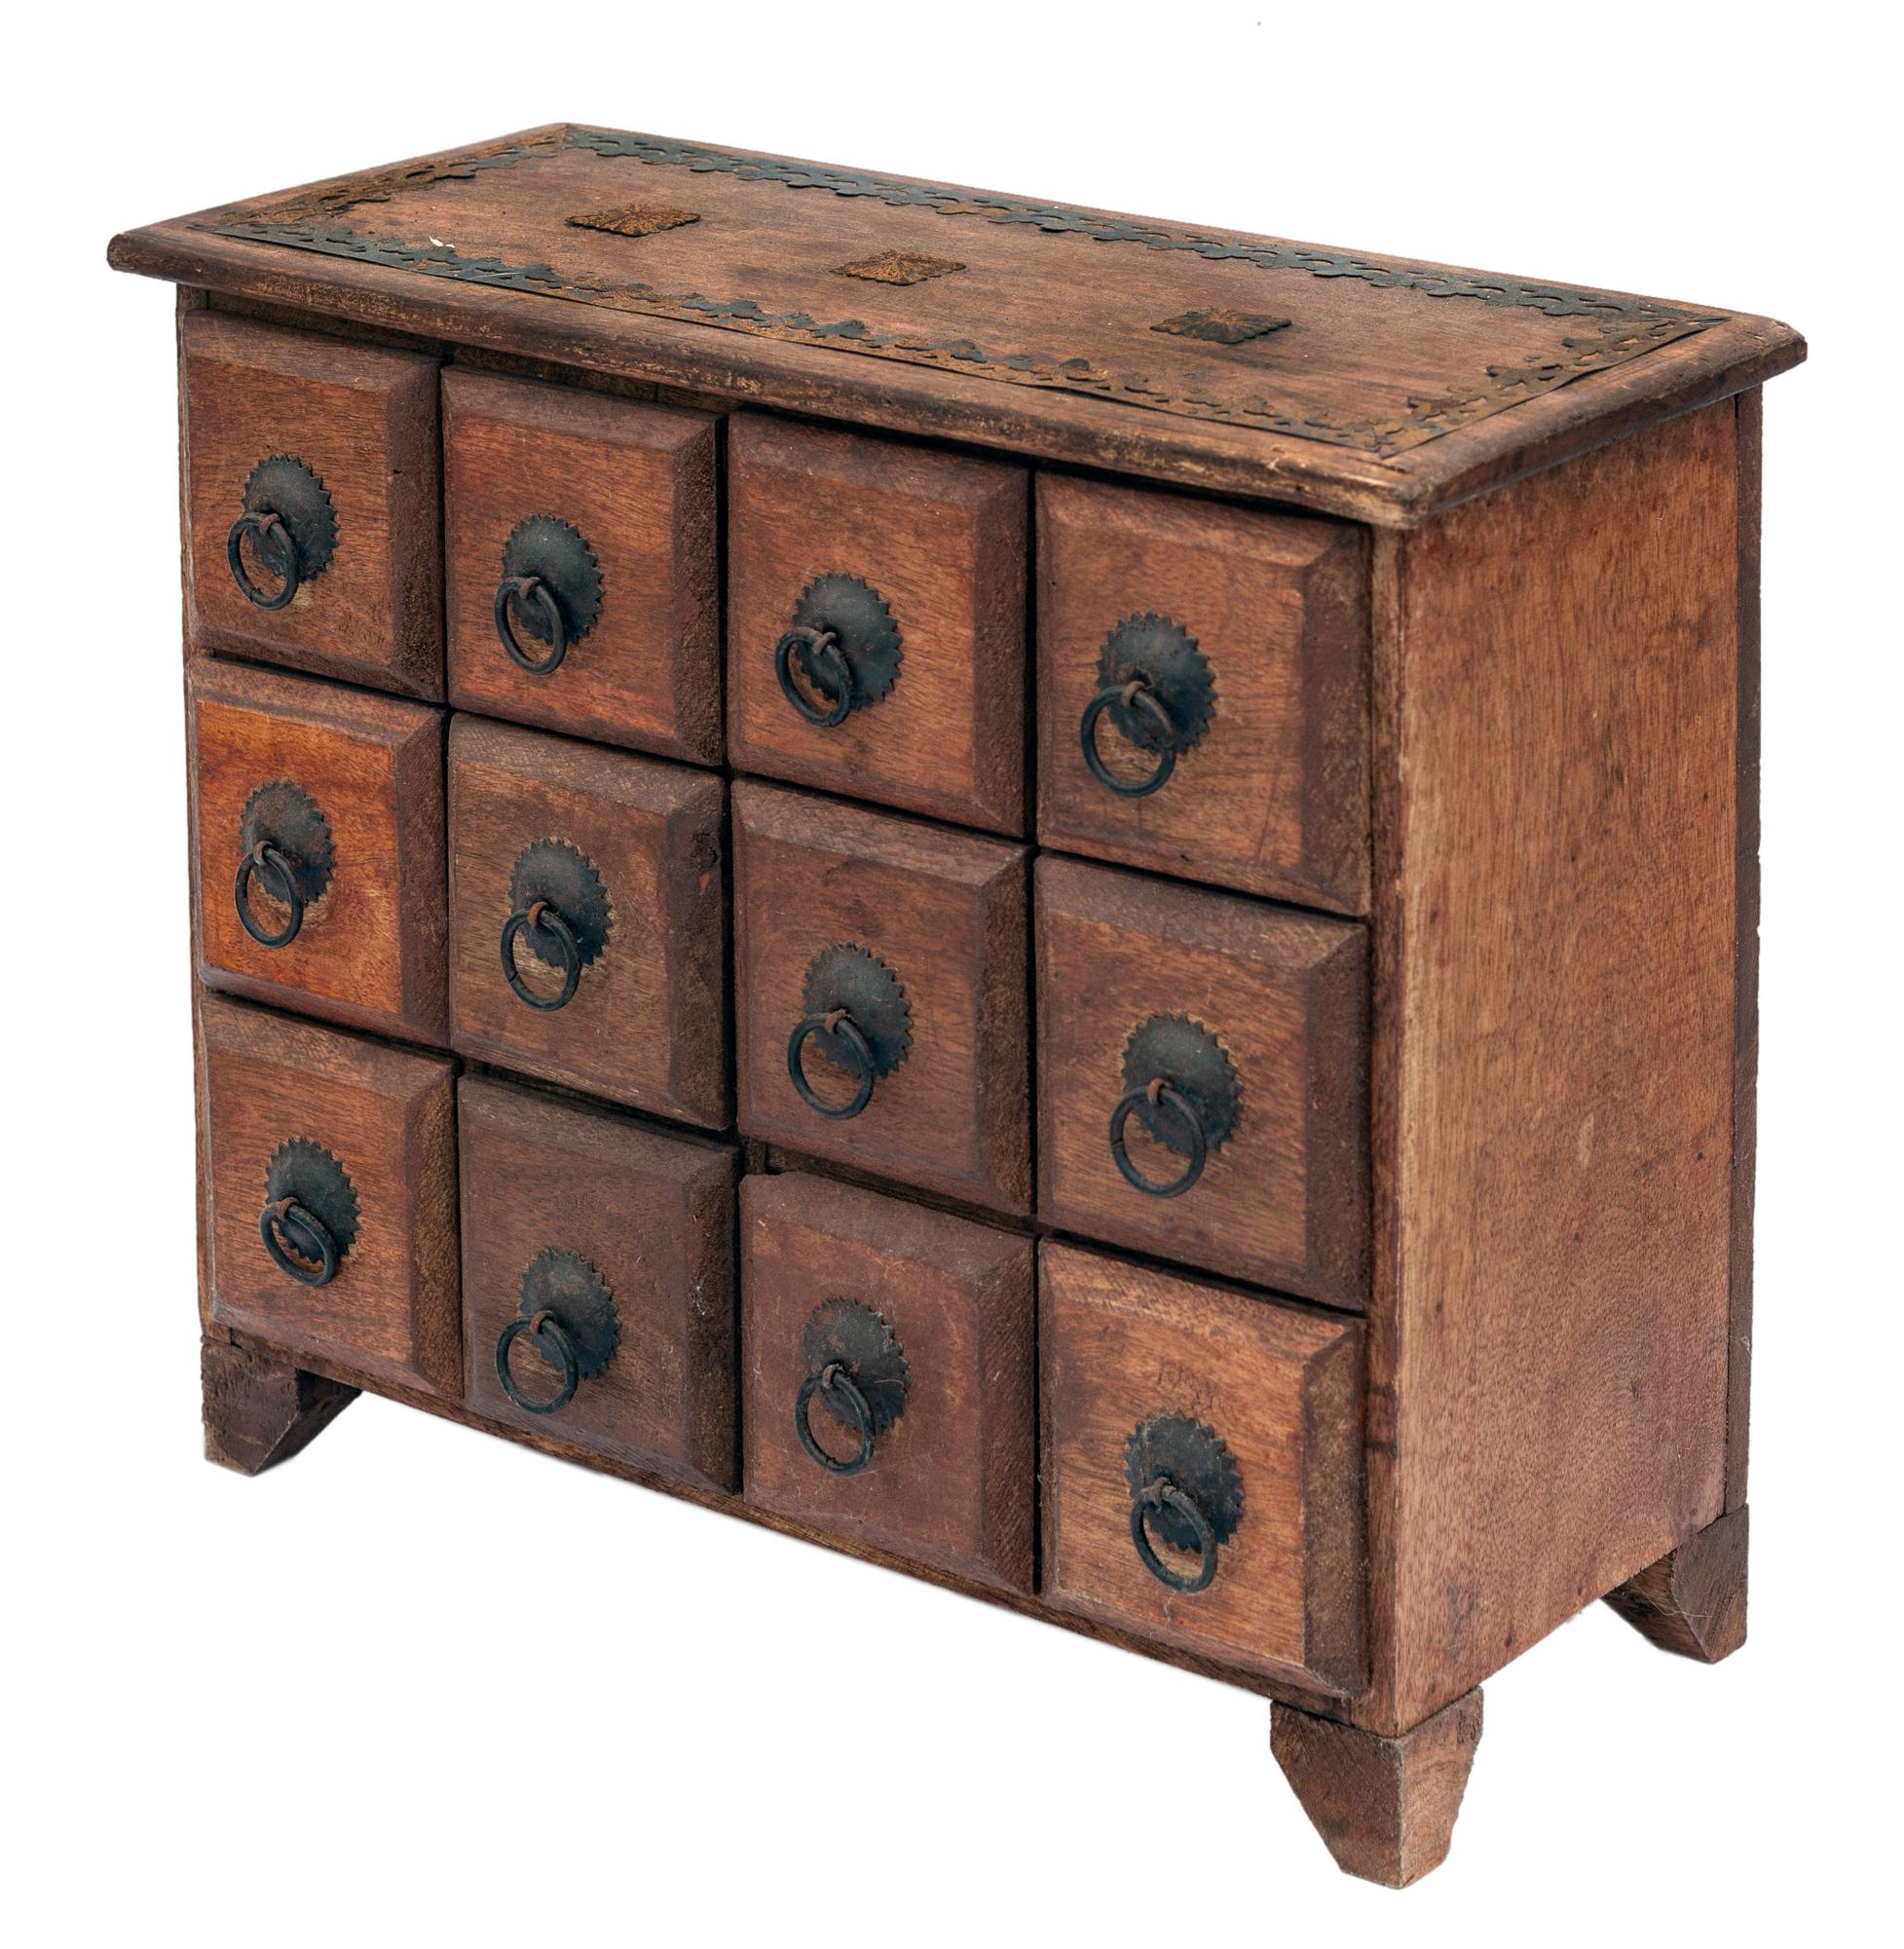 Hand crafted chest from Indonesia. A great organizing tool that adds rustic beauty to your room. Perfect for sorting and organizing.